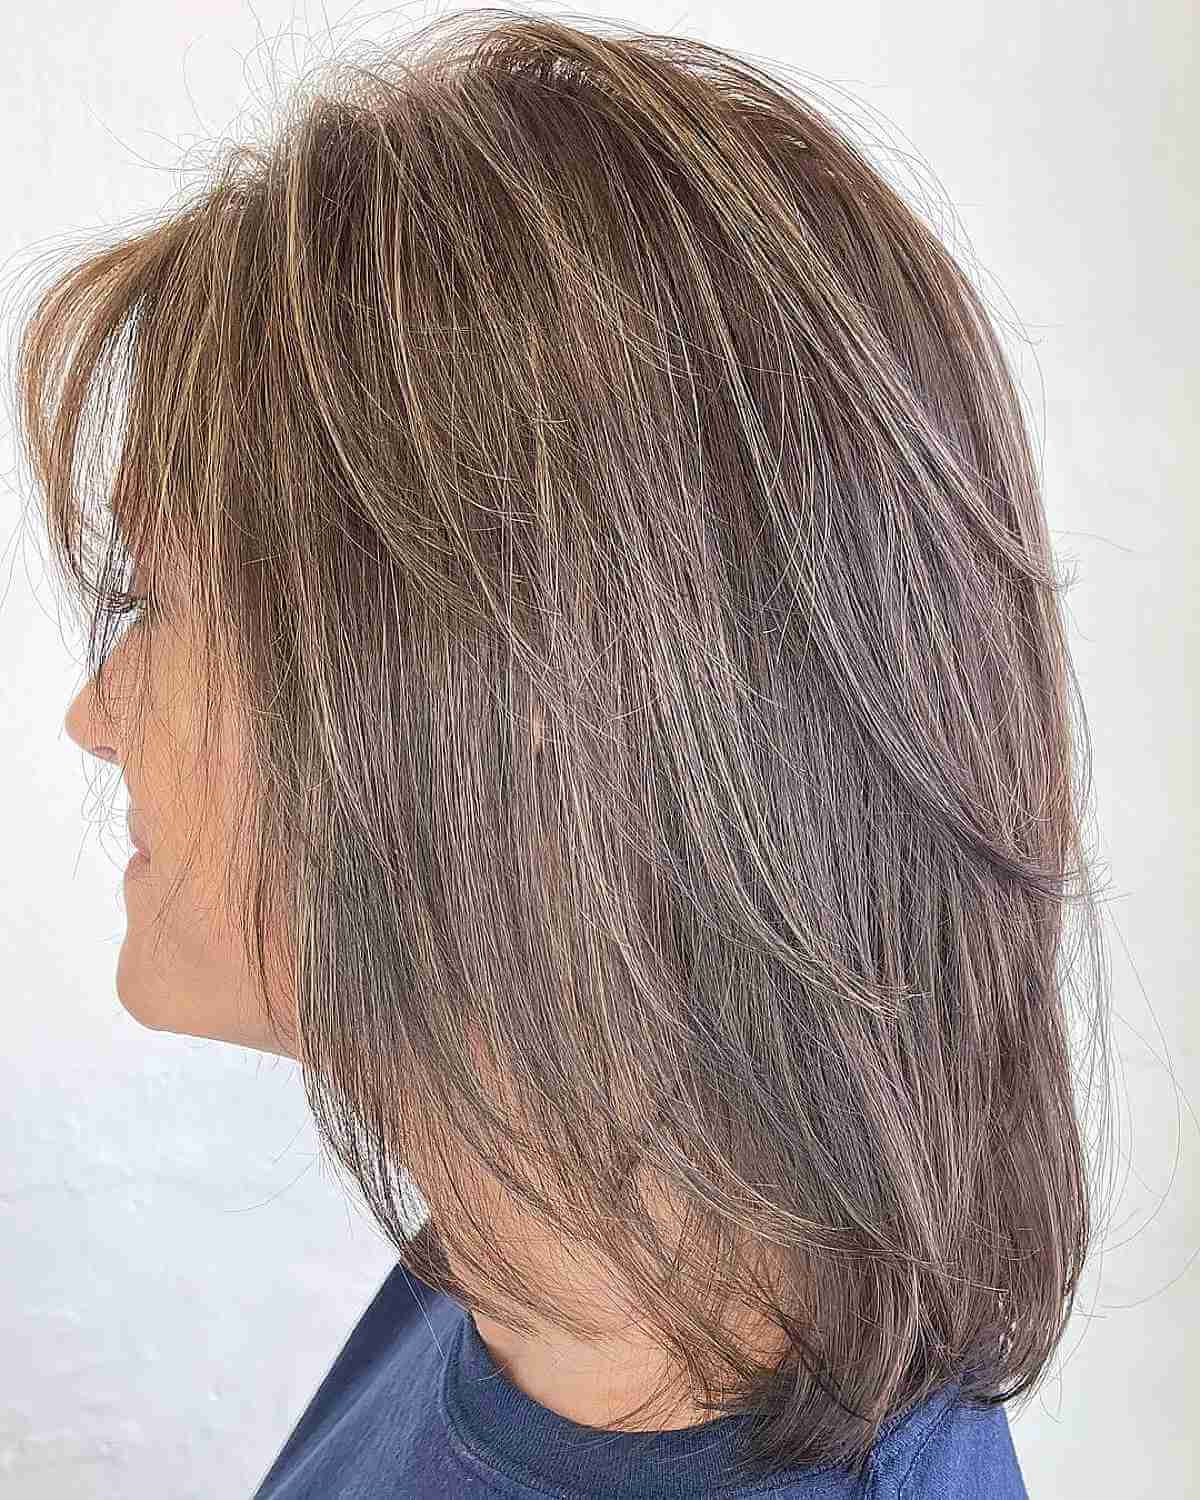 Long Stacked Layers on a Short to Medium Haircut